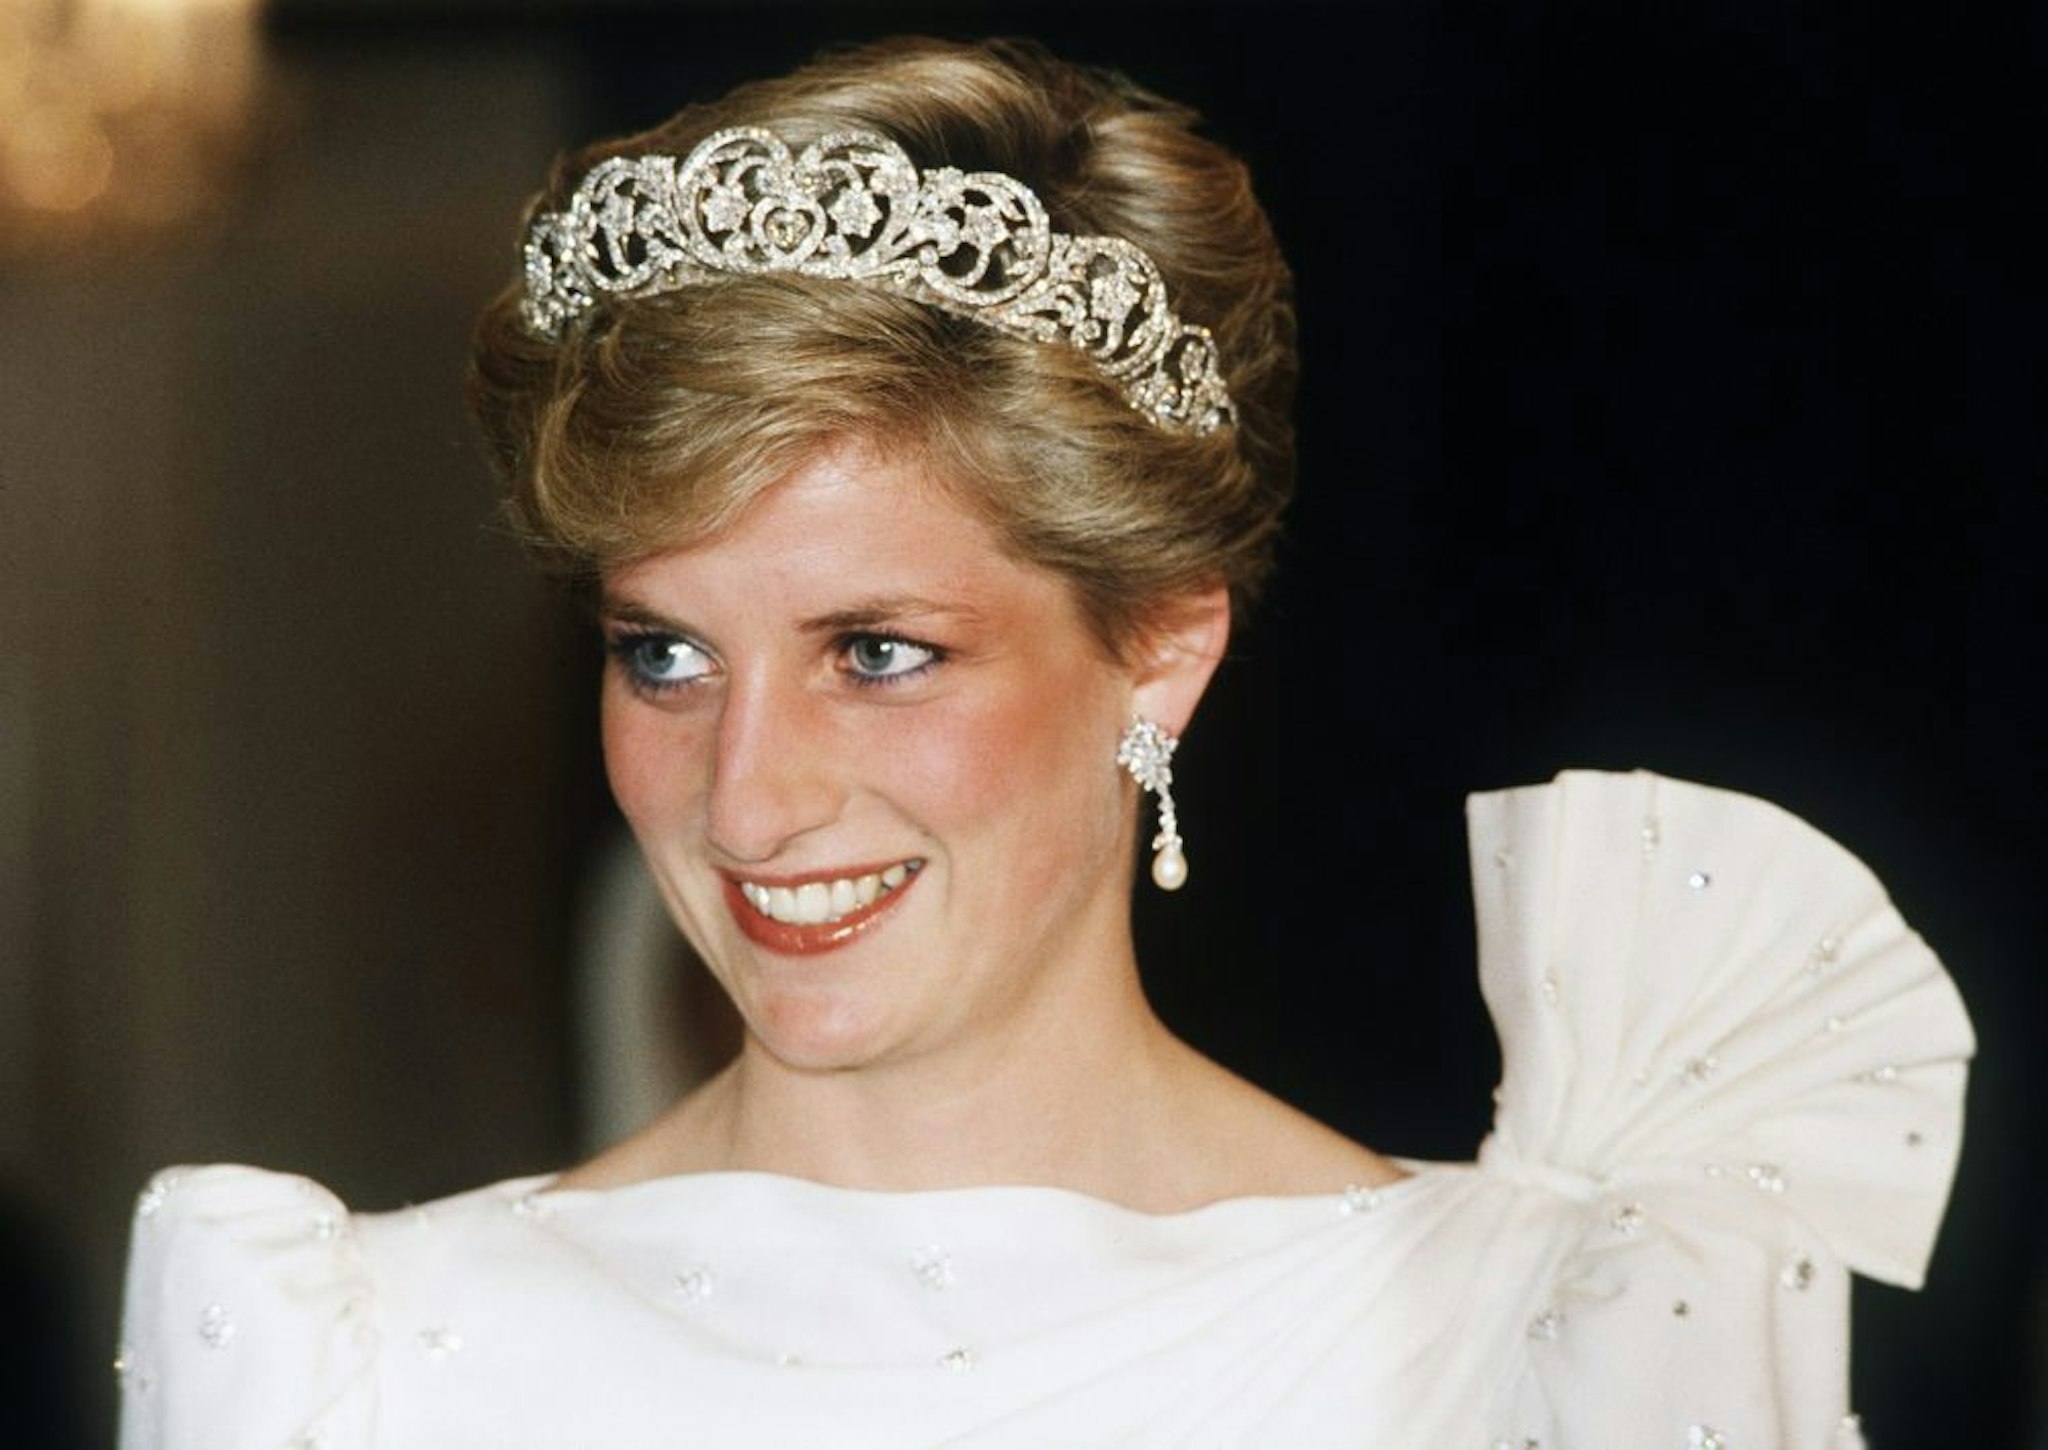 BAHRAIN - NOVEMBER 16: Diana, Princess of Wales, wearing a white dress designed by David and Elizabeth Emanuel with the Spencer Tiara, attends a State Banquet on November 16, 1986 in Bahrain.